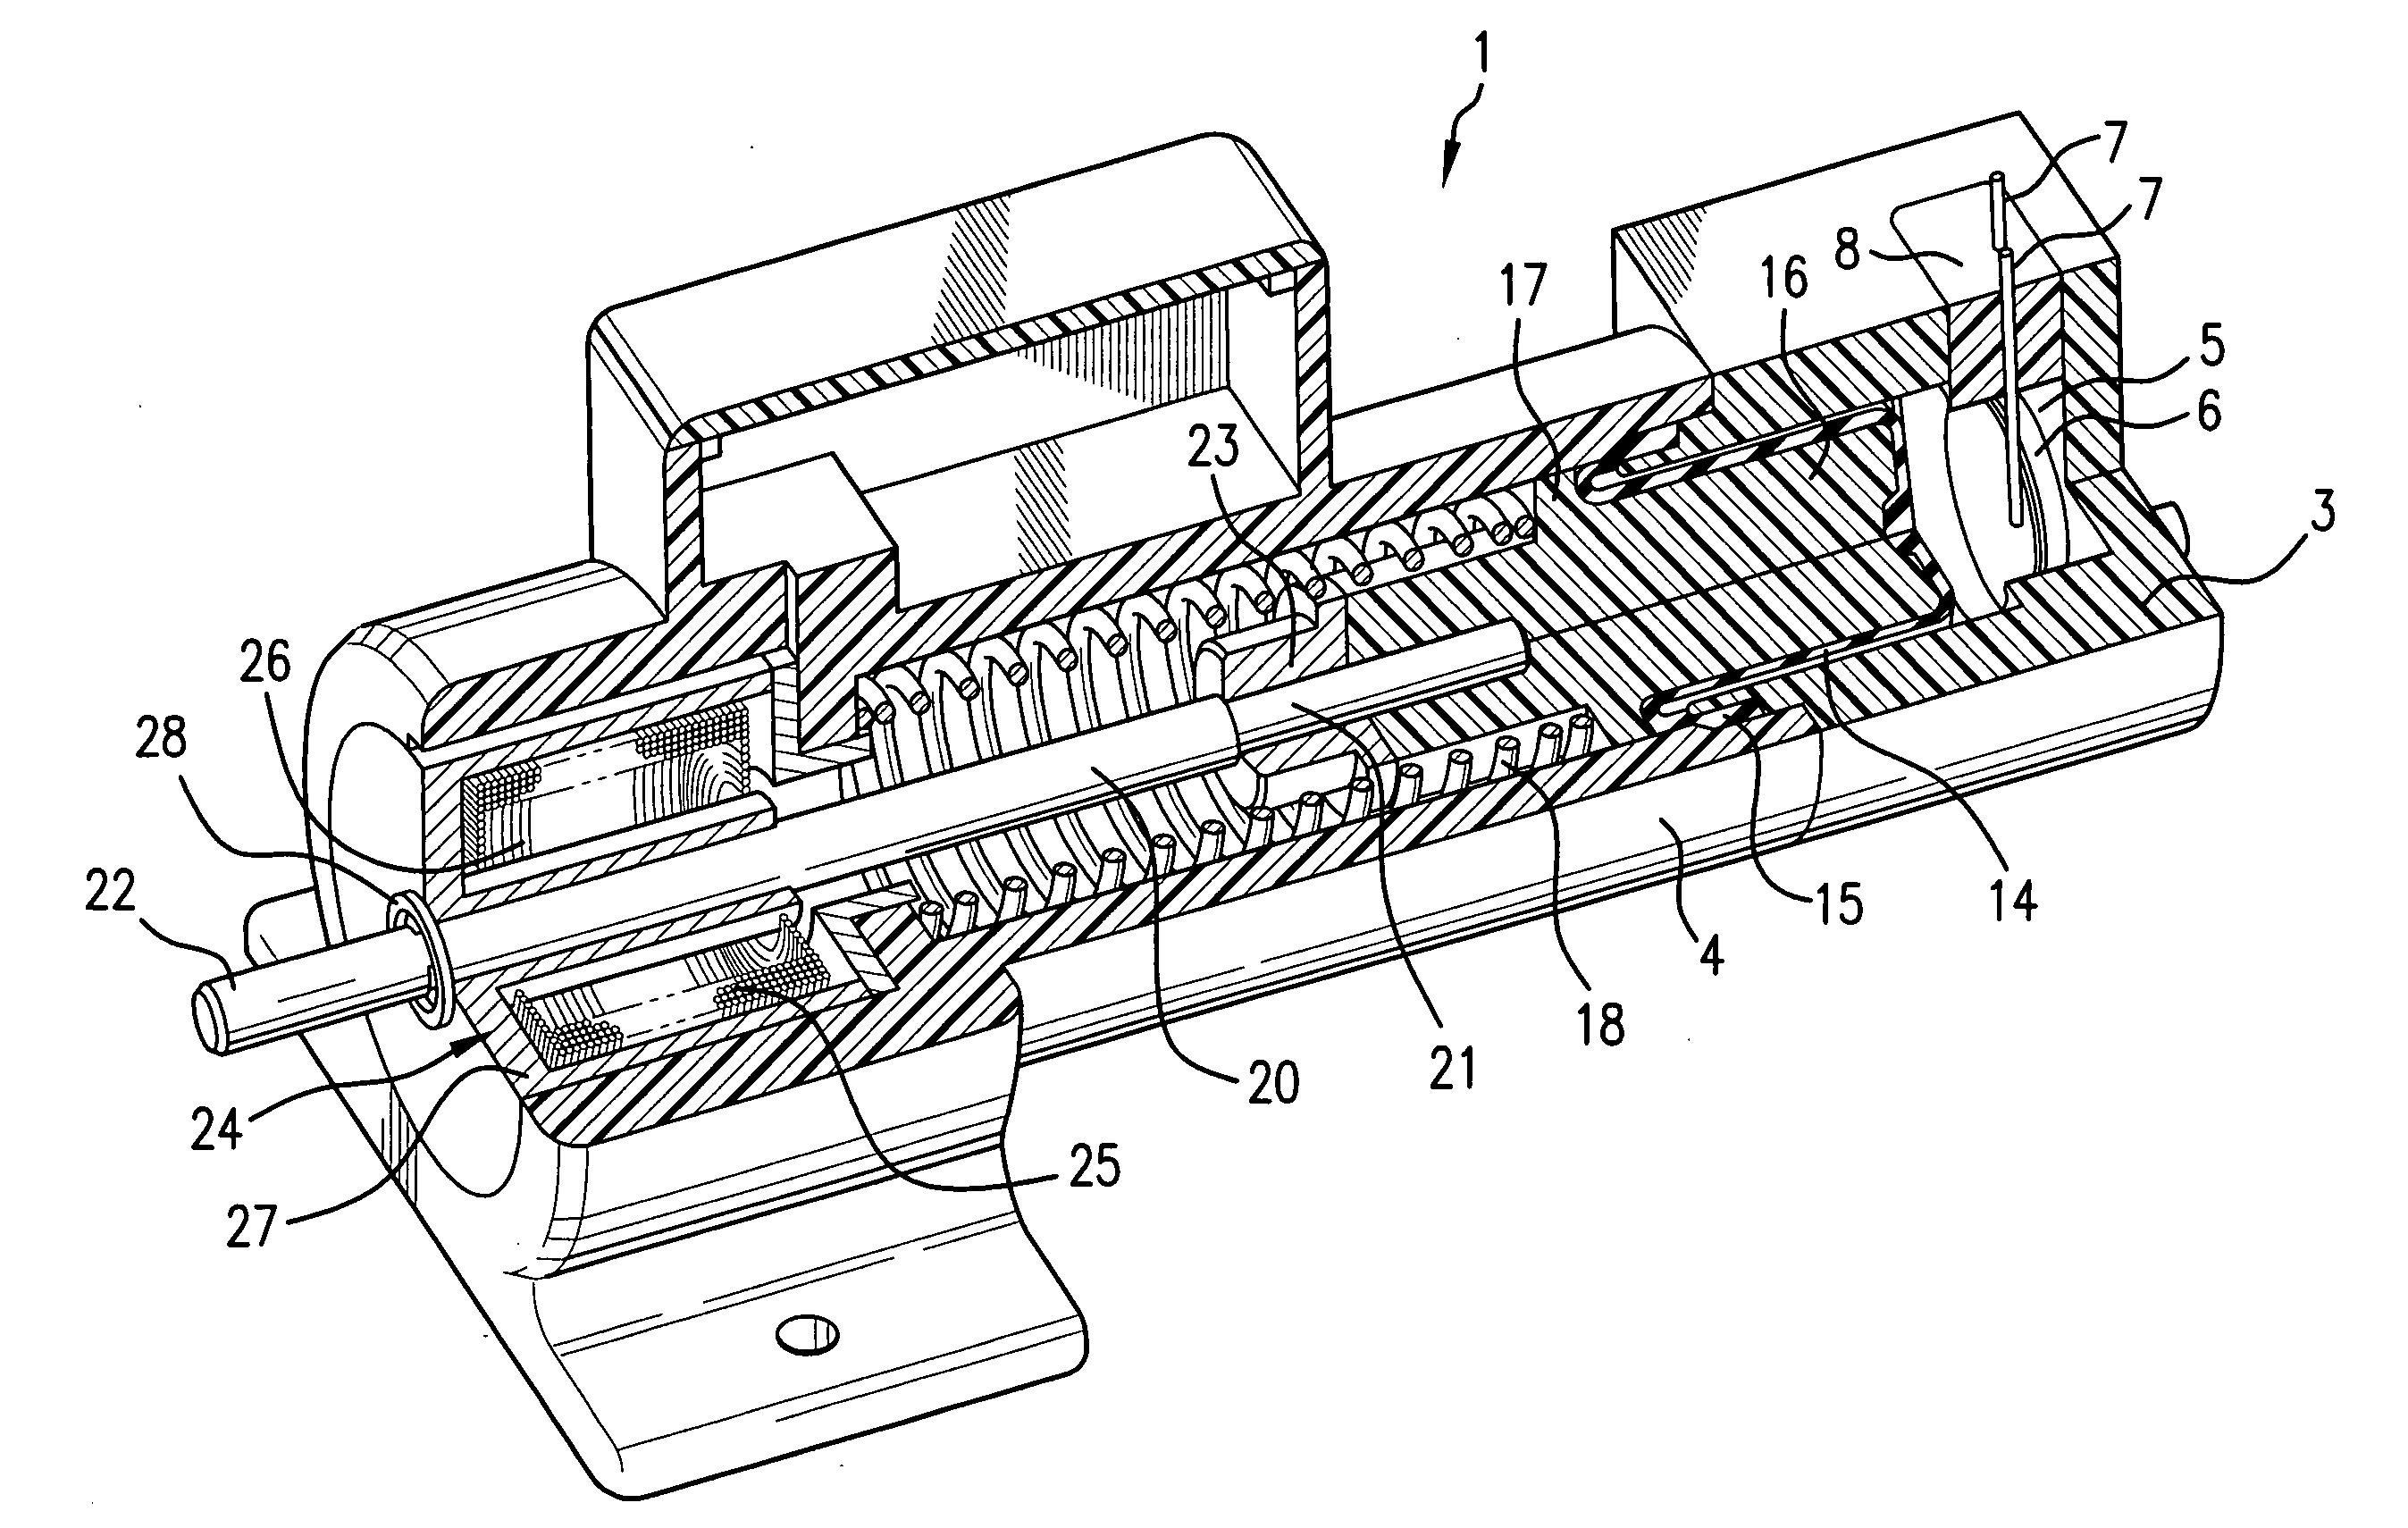 Thermo-magnetic actuator